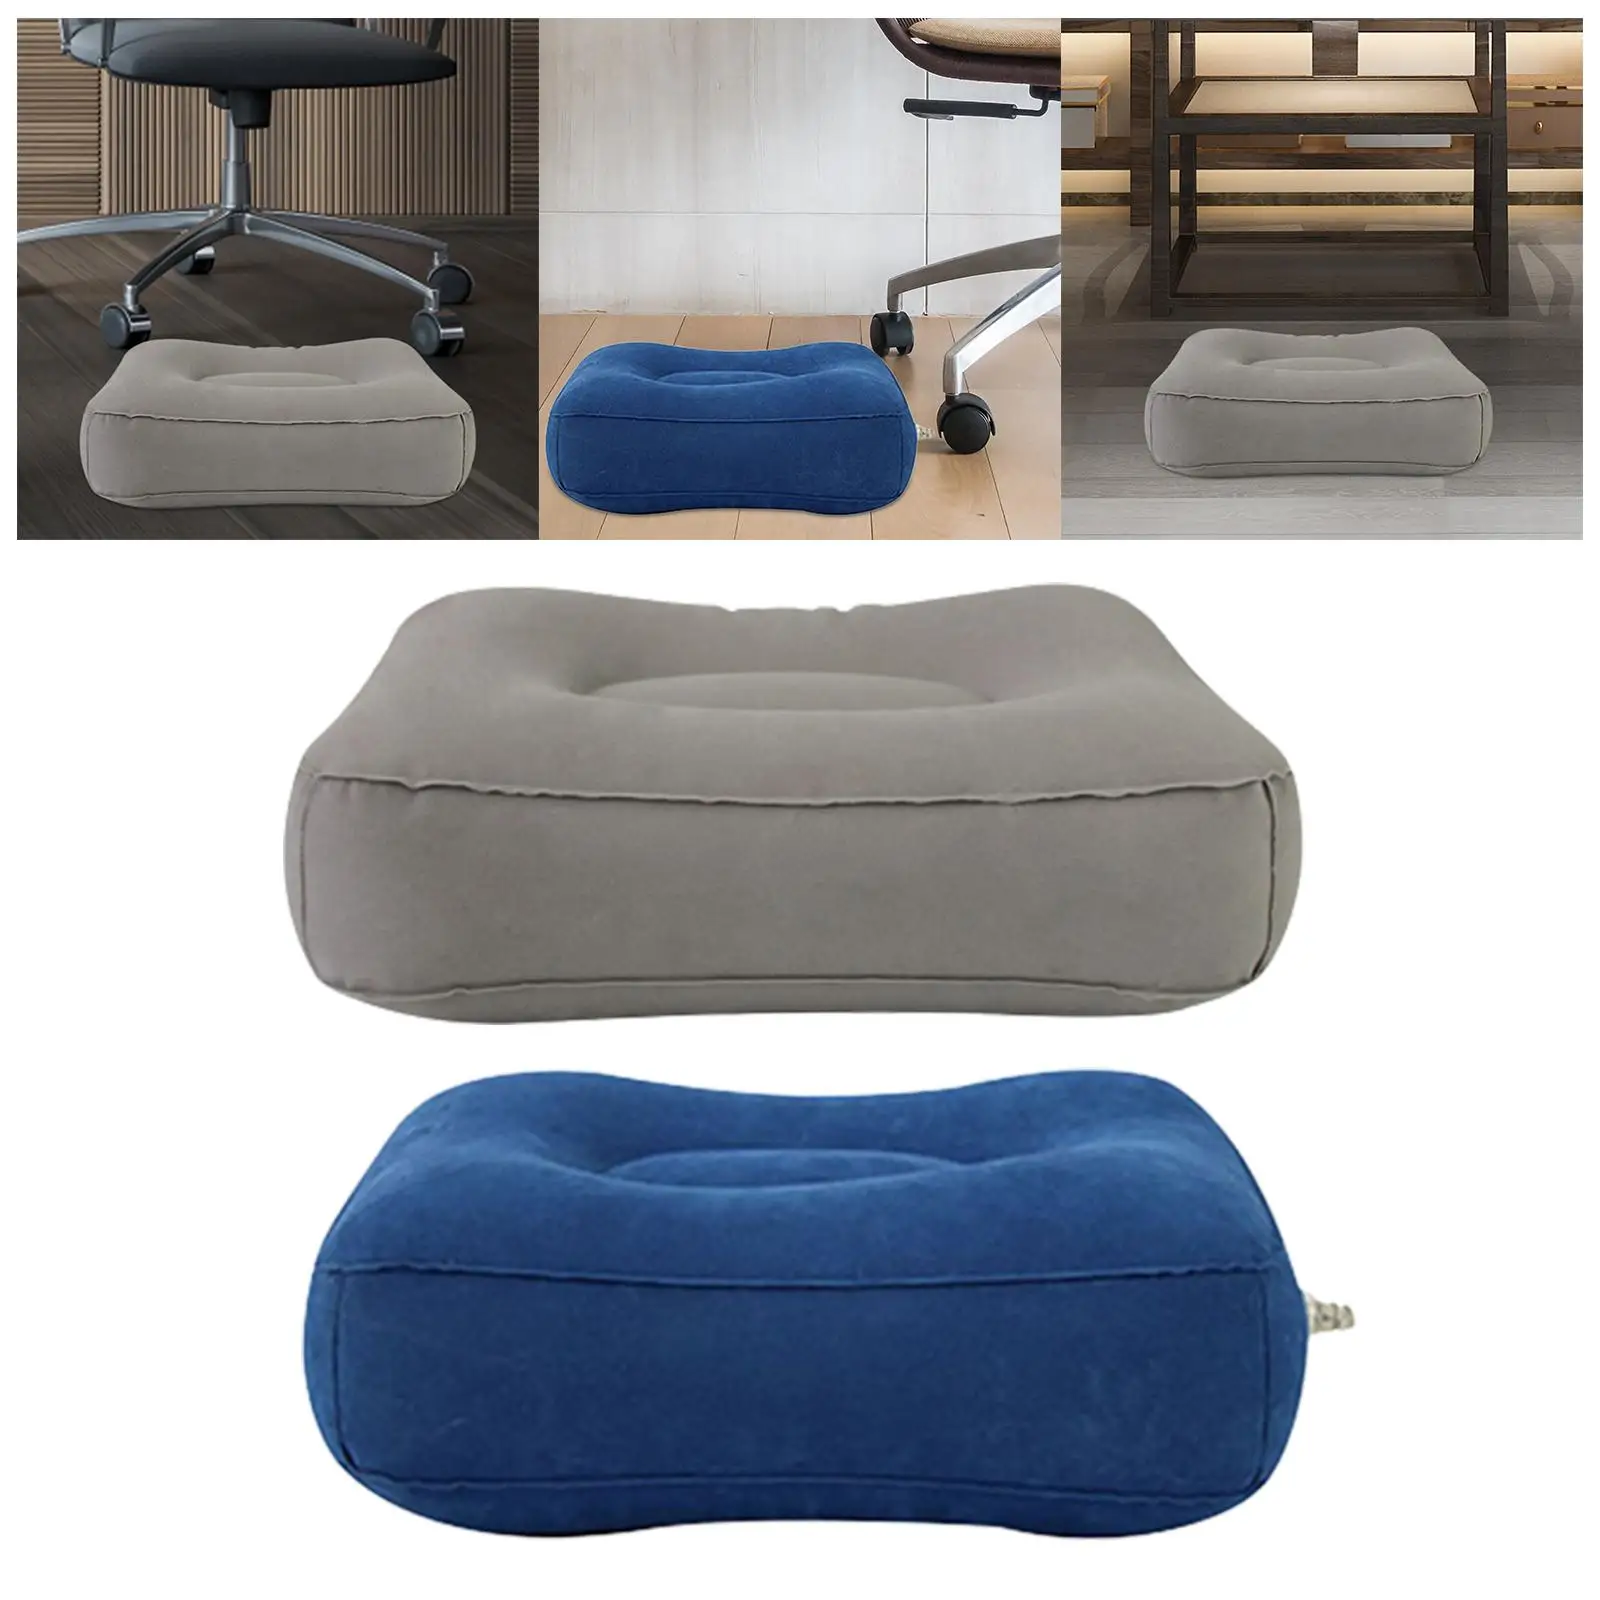 PVC Inflatable Flocking Foot Rest Pillow Inflatable Stool Ottoman for Office Airplane Camping Camping Mat 42x32x20cm